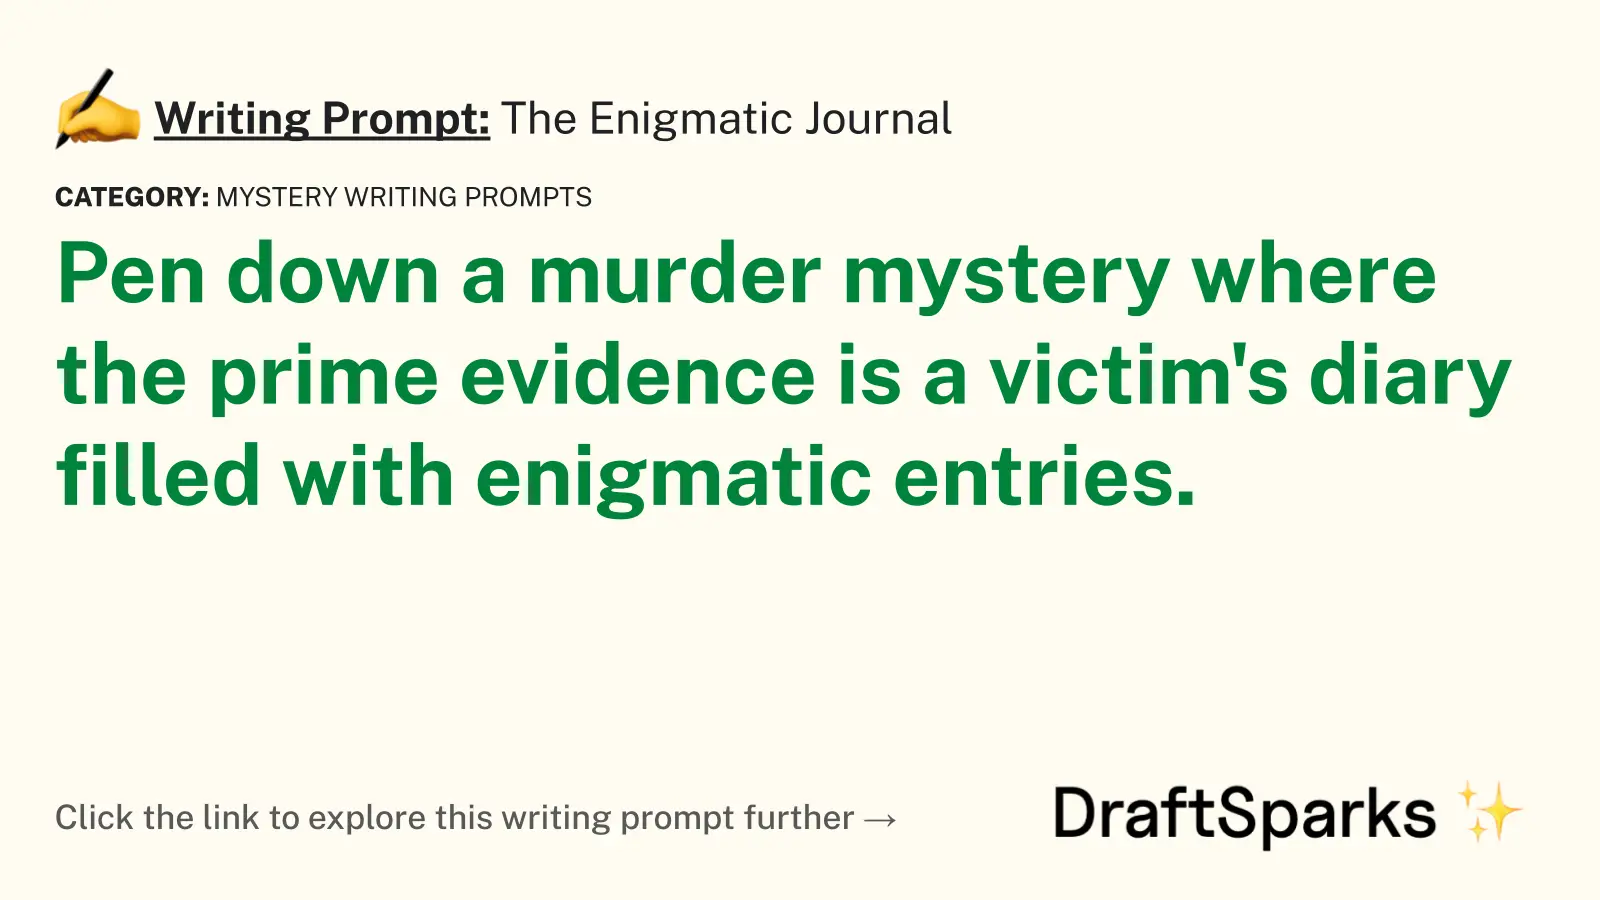 The Enigmatic Journal